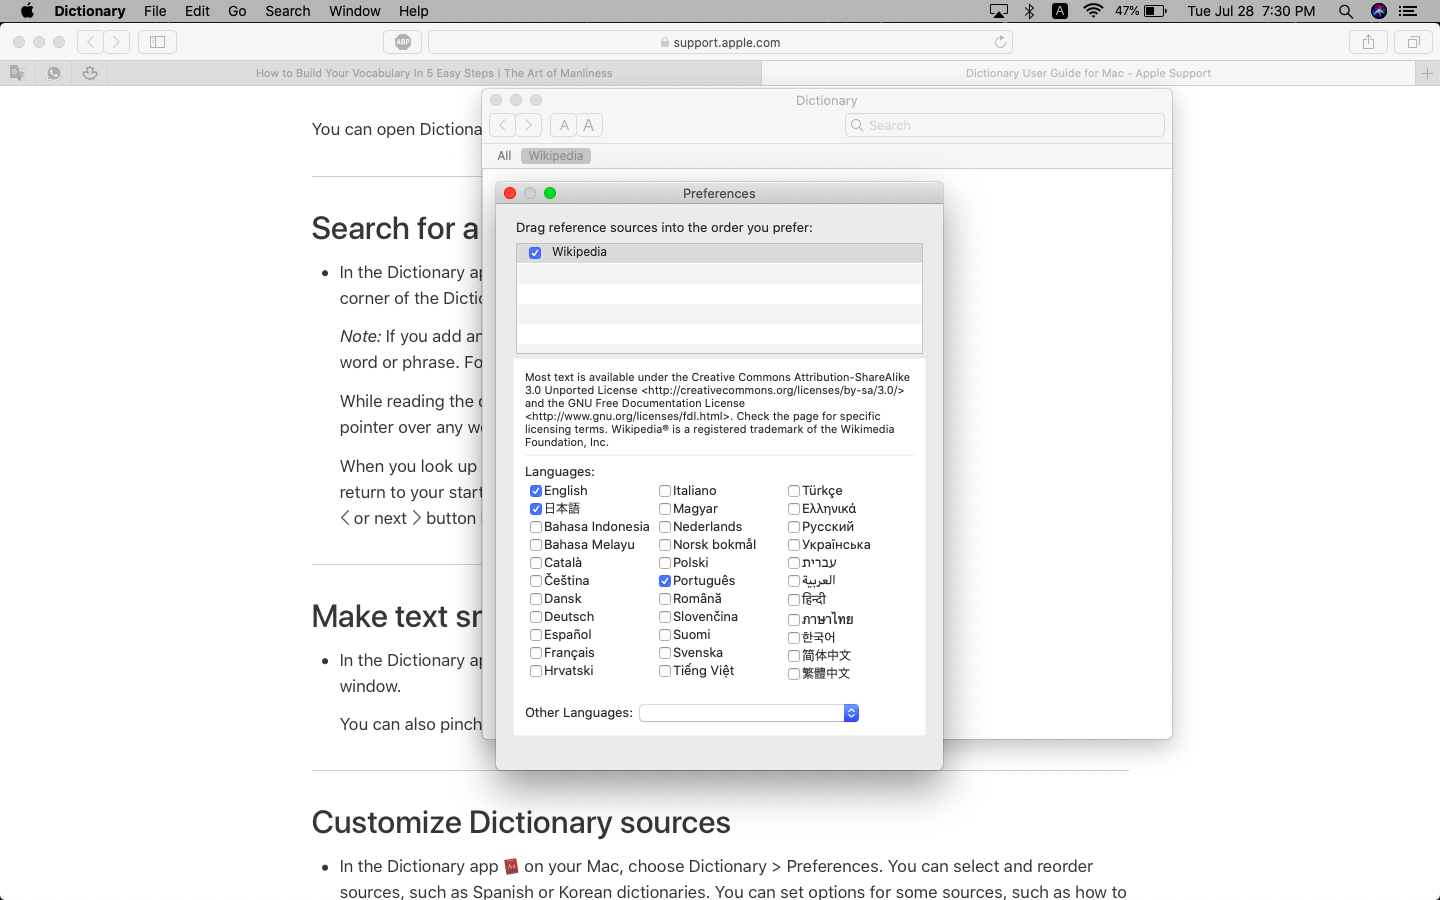 Dictionary User Guide for Mac - Apple Support